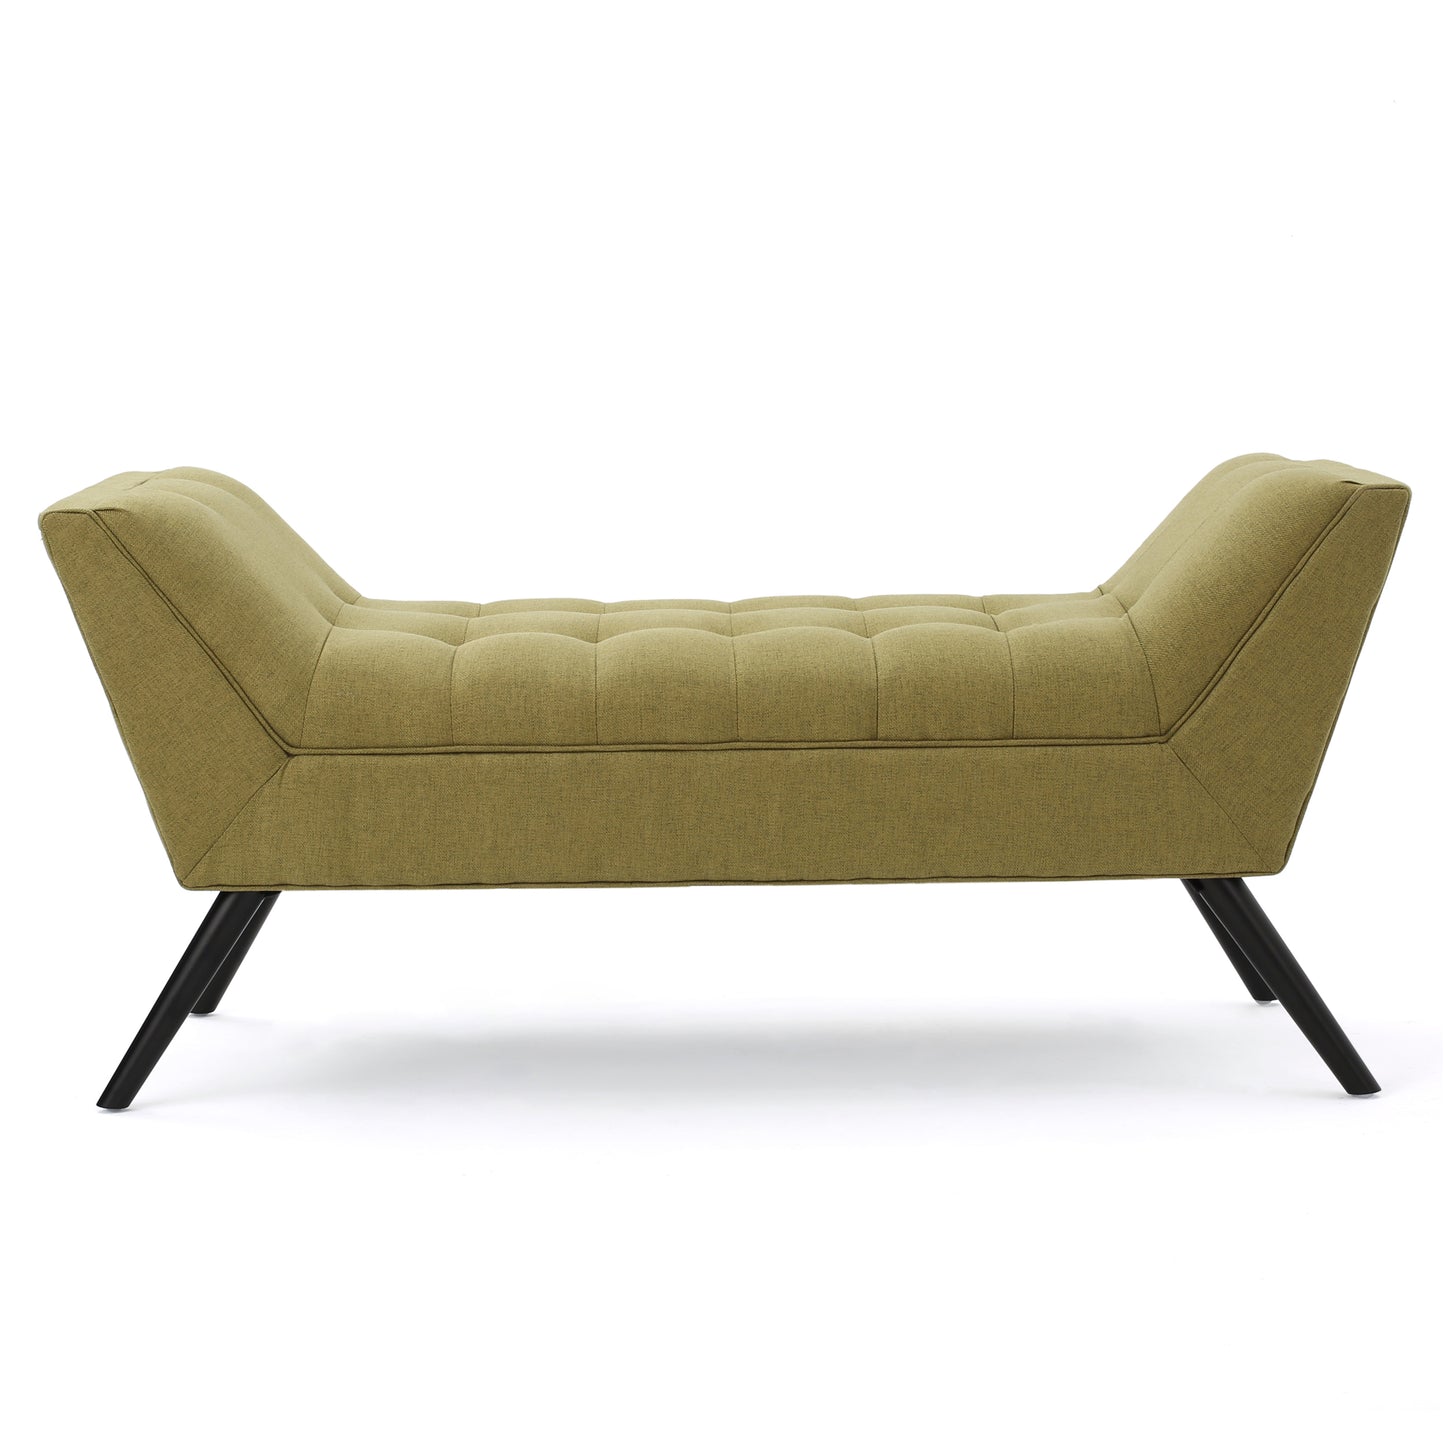 Madrid Mid-Century Modern Tufted Fabric Ottoman Bench with Tapered Legs